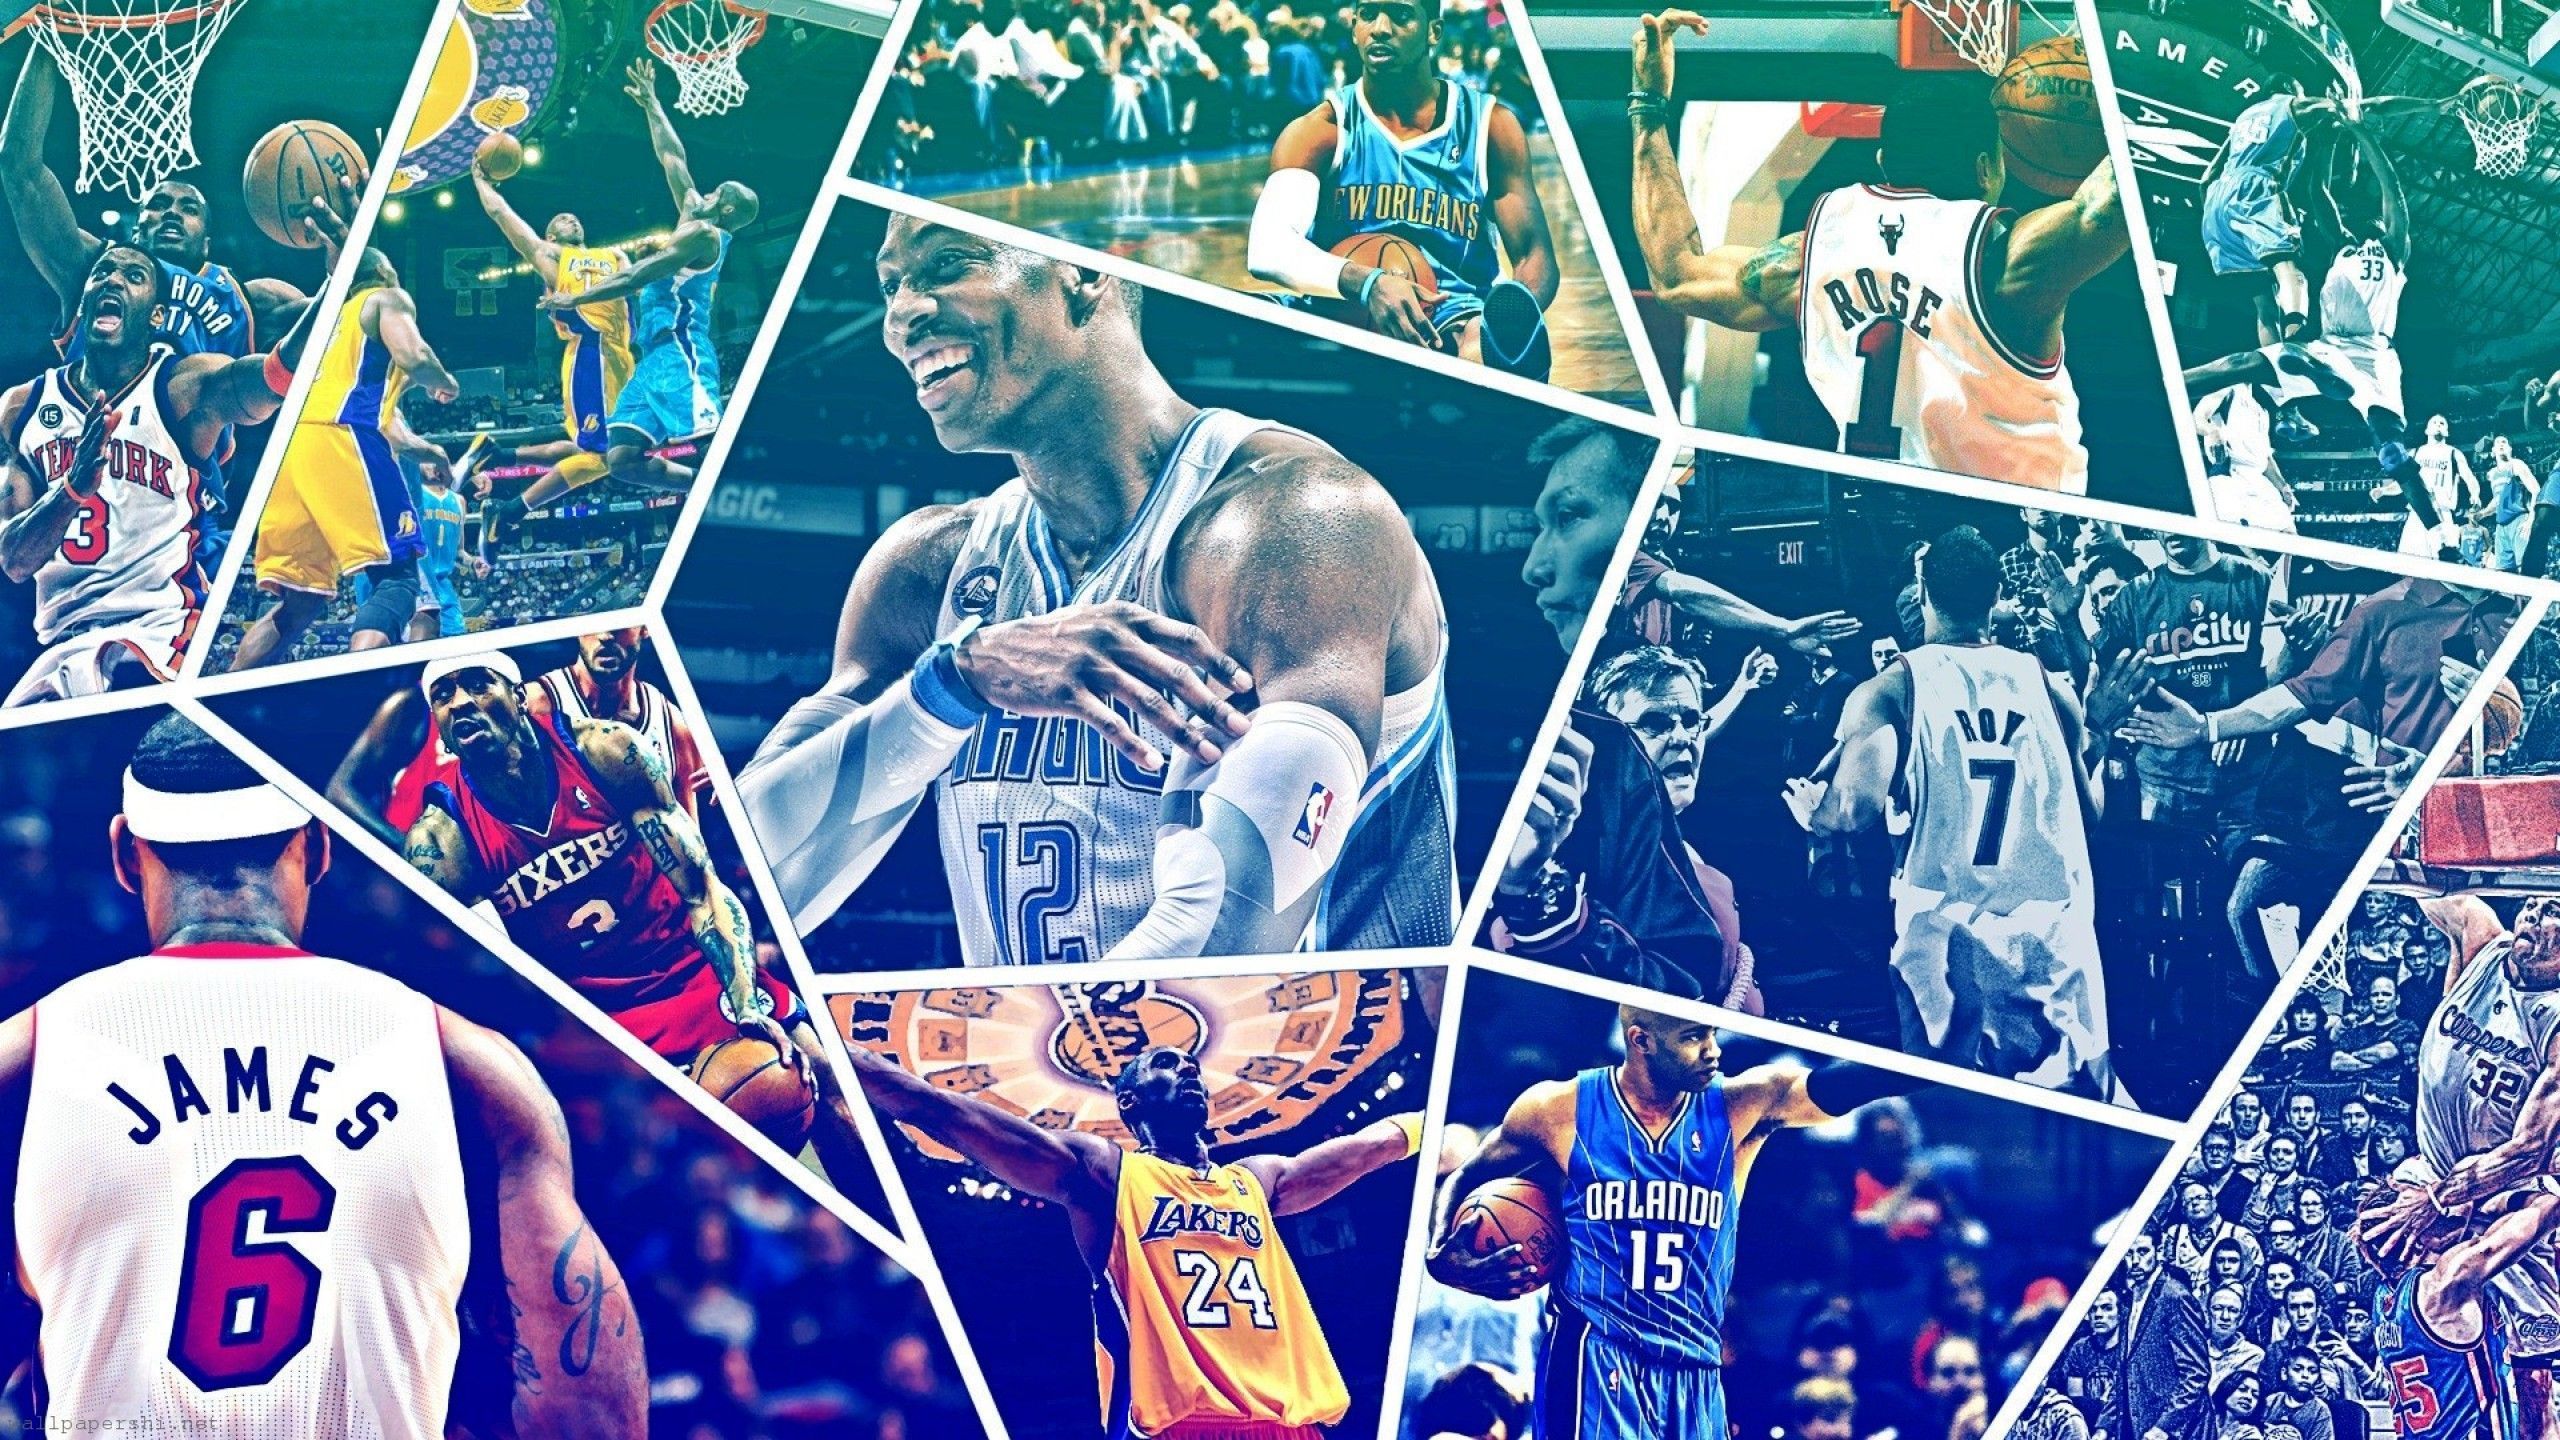 Sports Player Wallpaper Free Sports Player Background